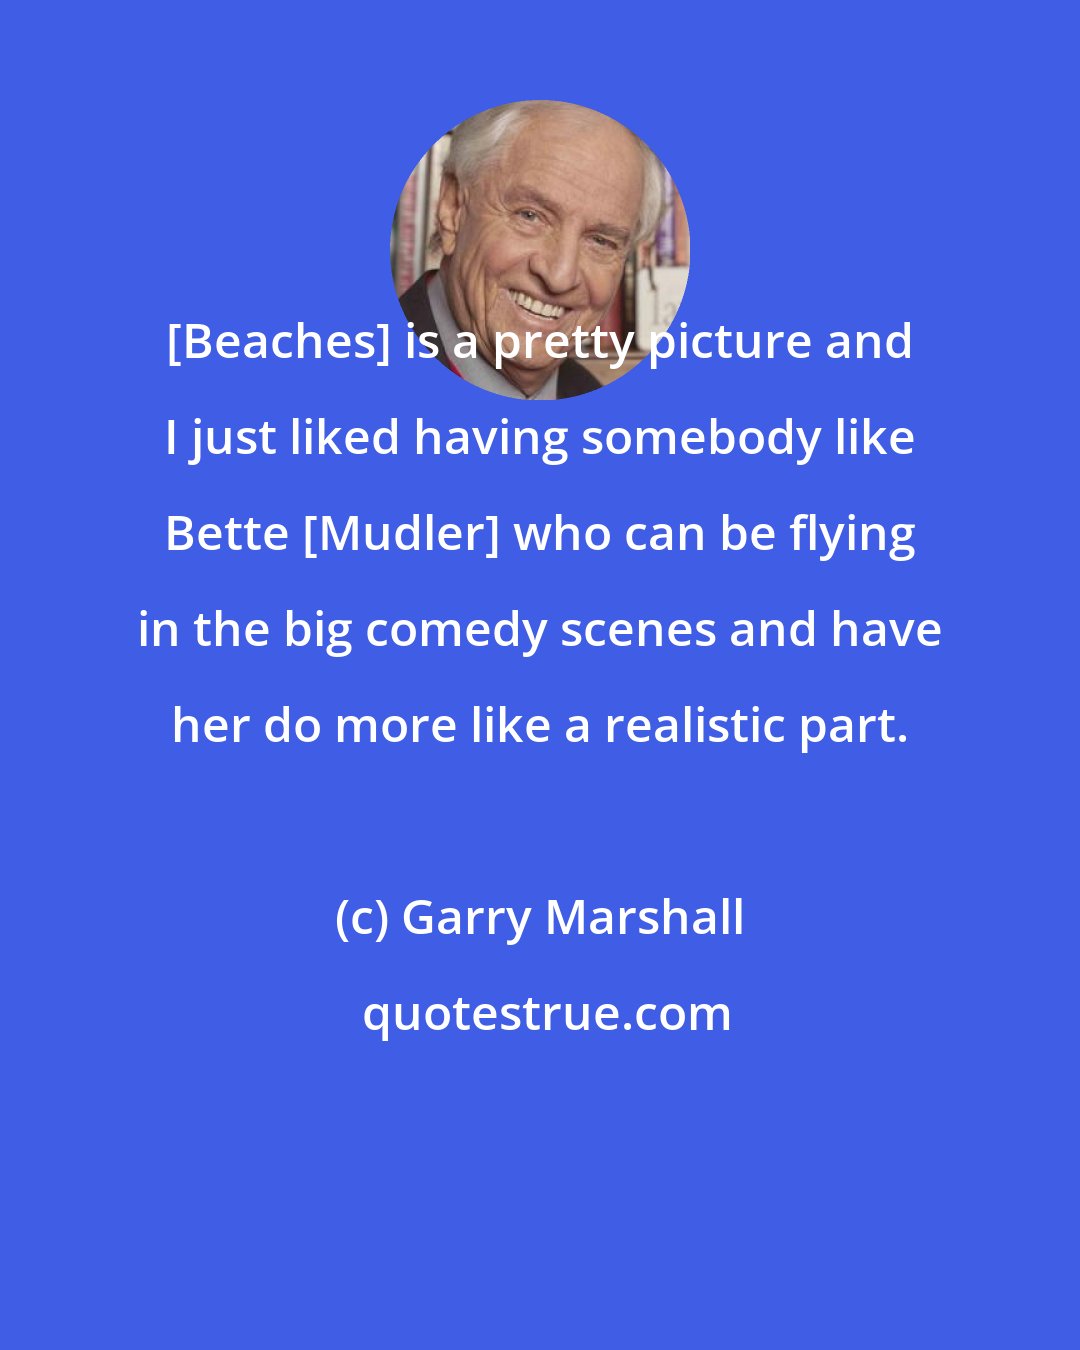 Garry Marshall: [Beaches] is a pretty picture and I just liked having somebody like Bette [Mudler] who can be flying in the big comedy scenes and have her do more like a realistic part.